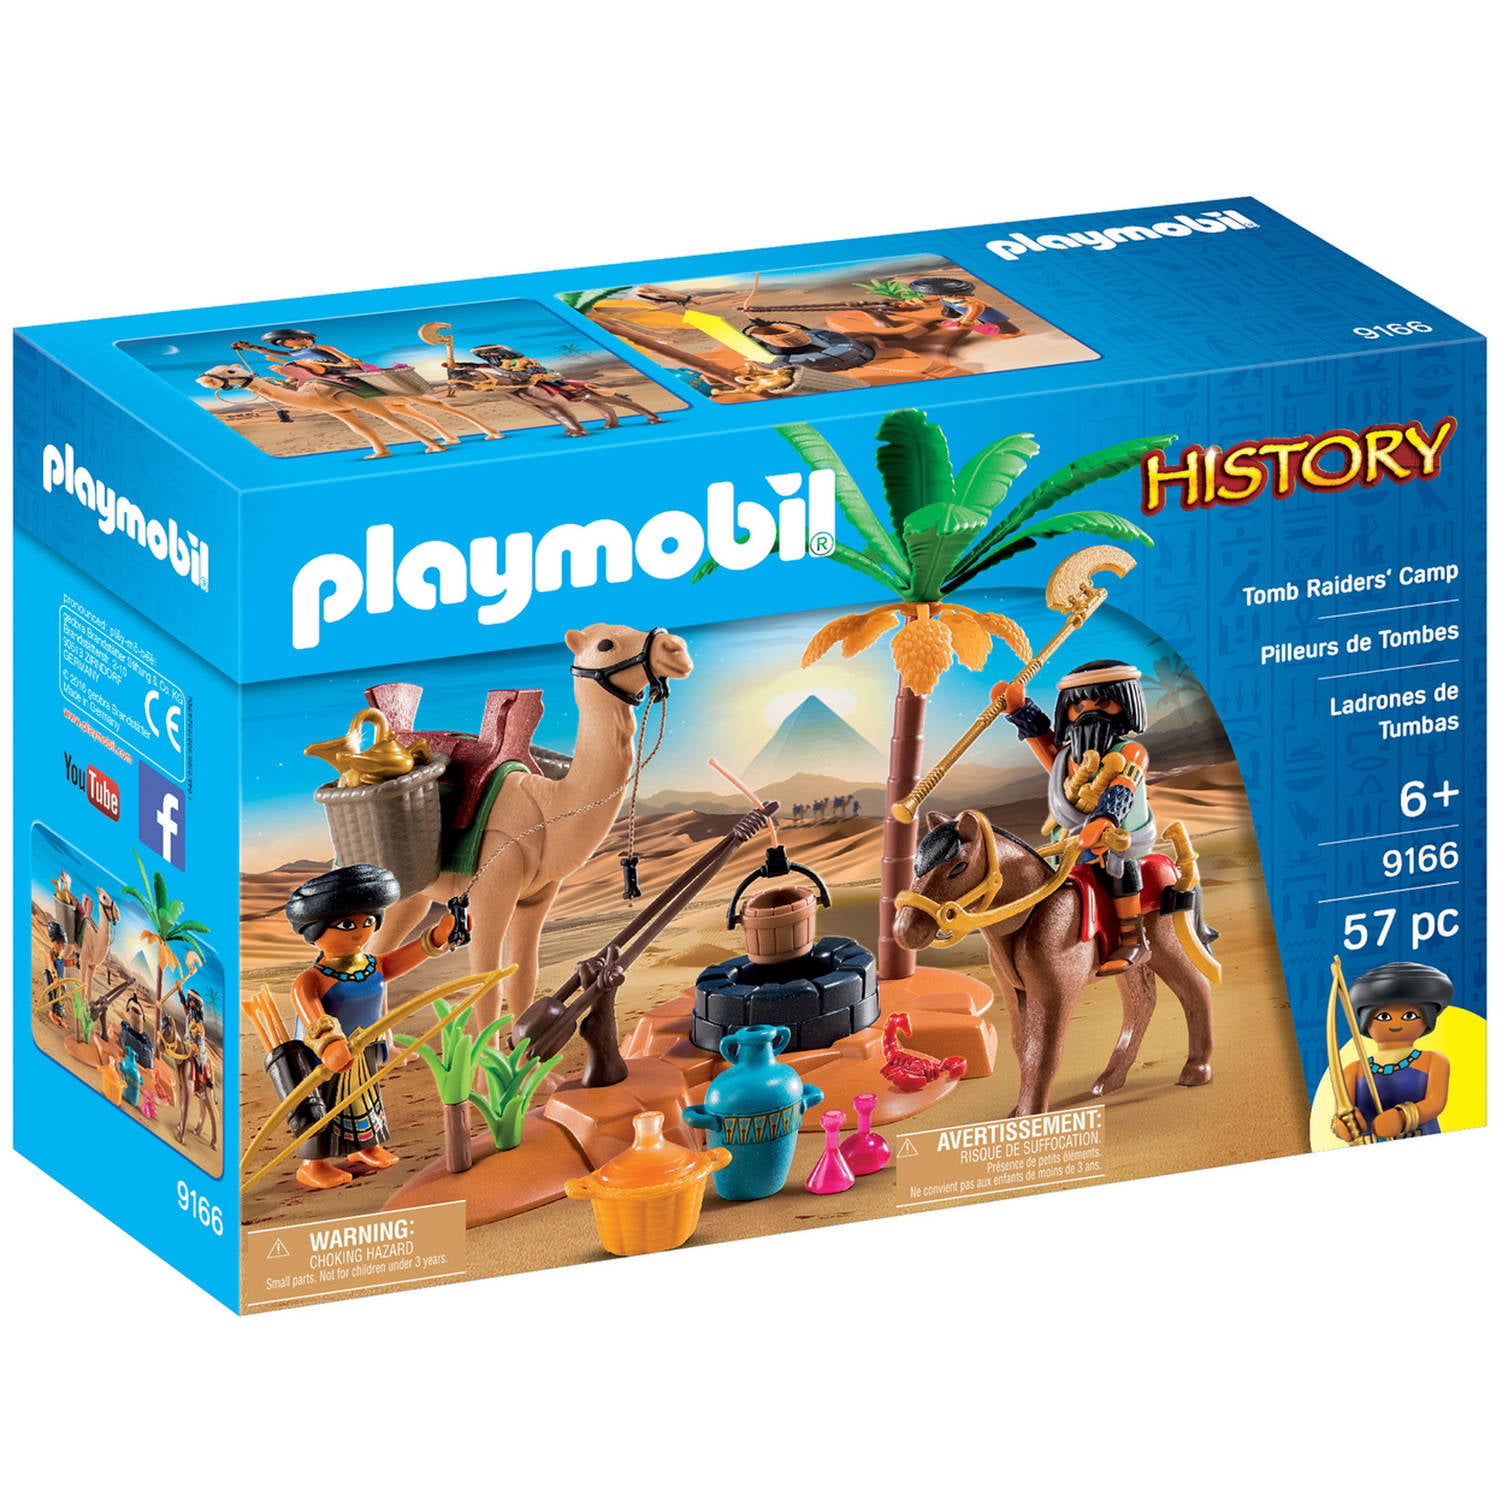 Details about   PLAYMOBIL History 5387 Egyptian Tomb Raider's Camp with or without box 